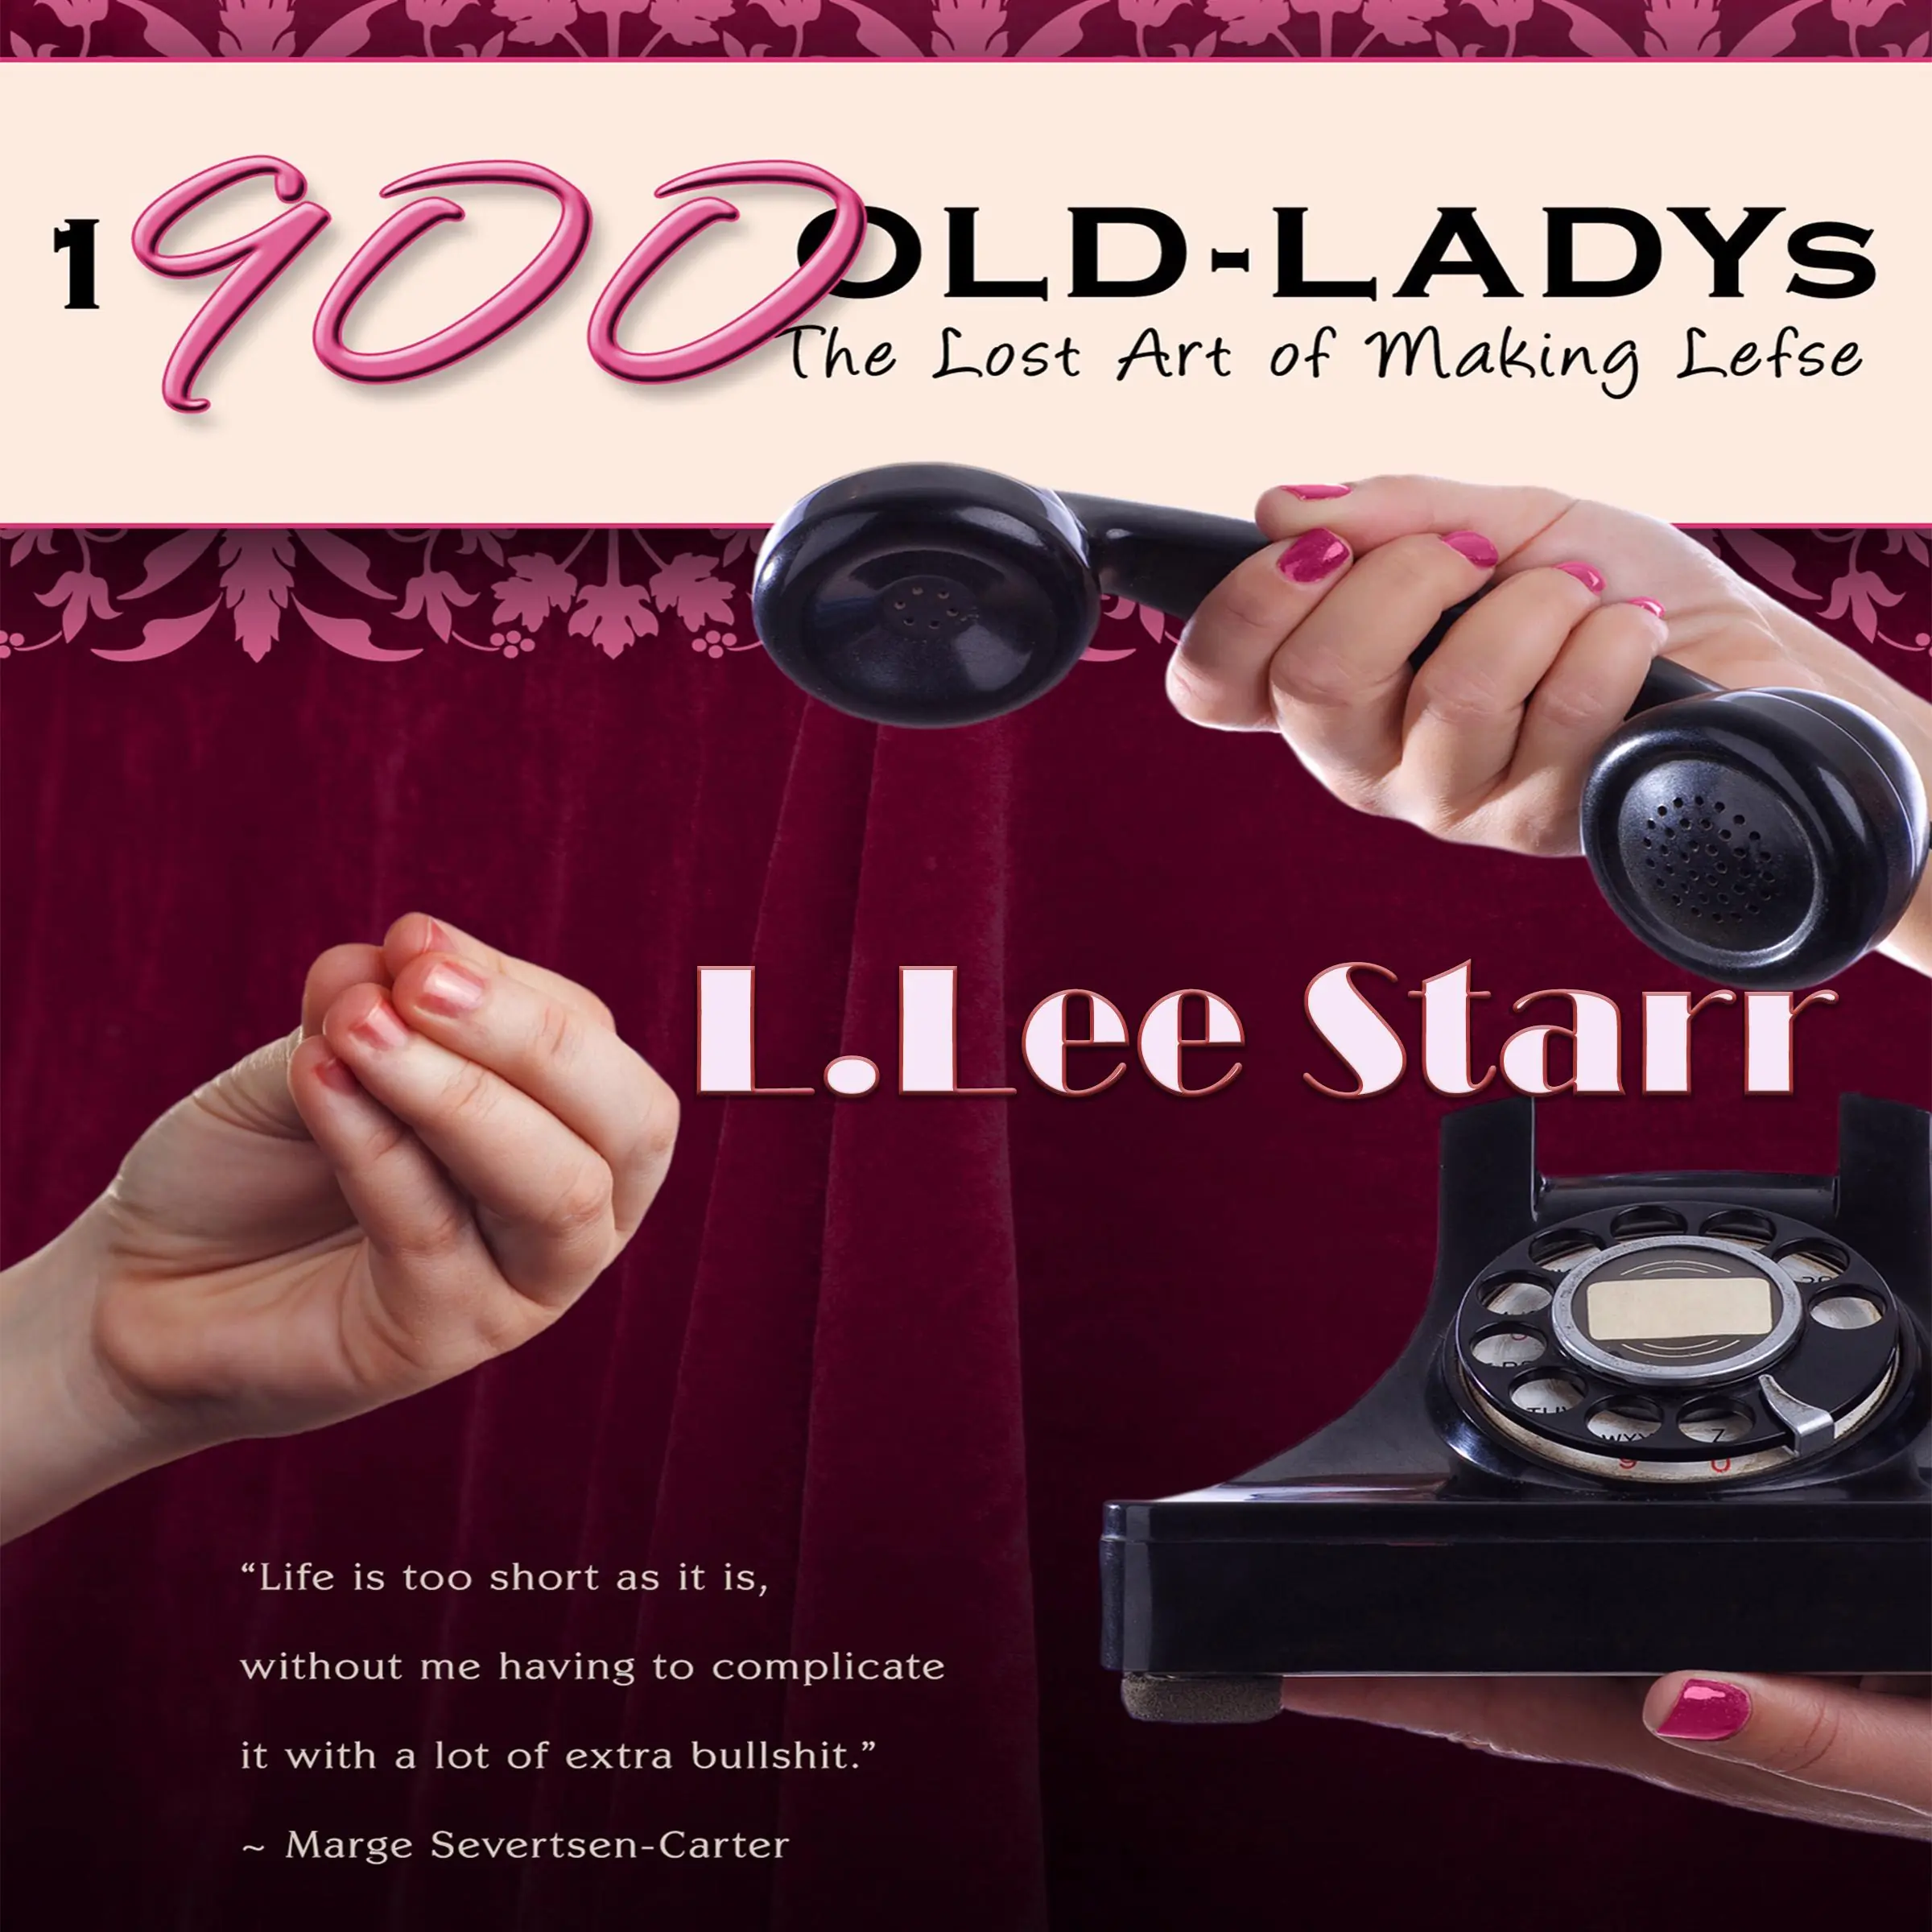 1-900-OLD-LADYs: The Lost Art of Making Lefse by L. Lee Starr Audiobook